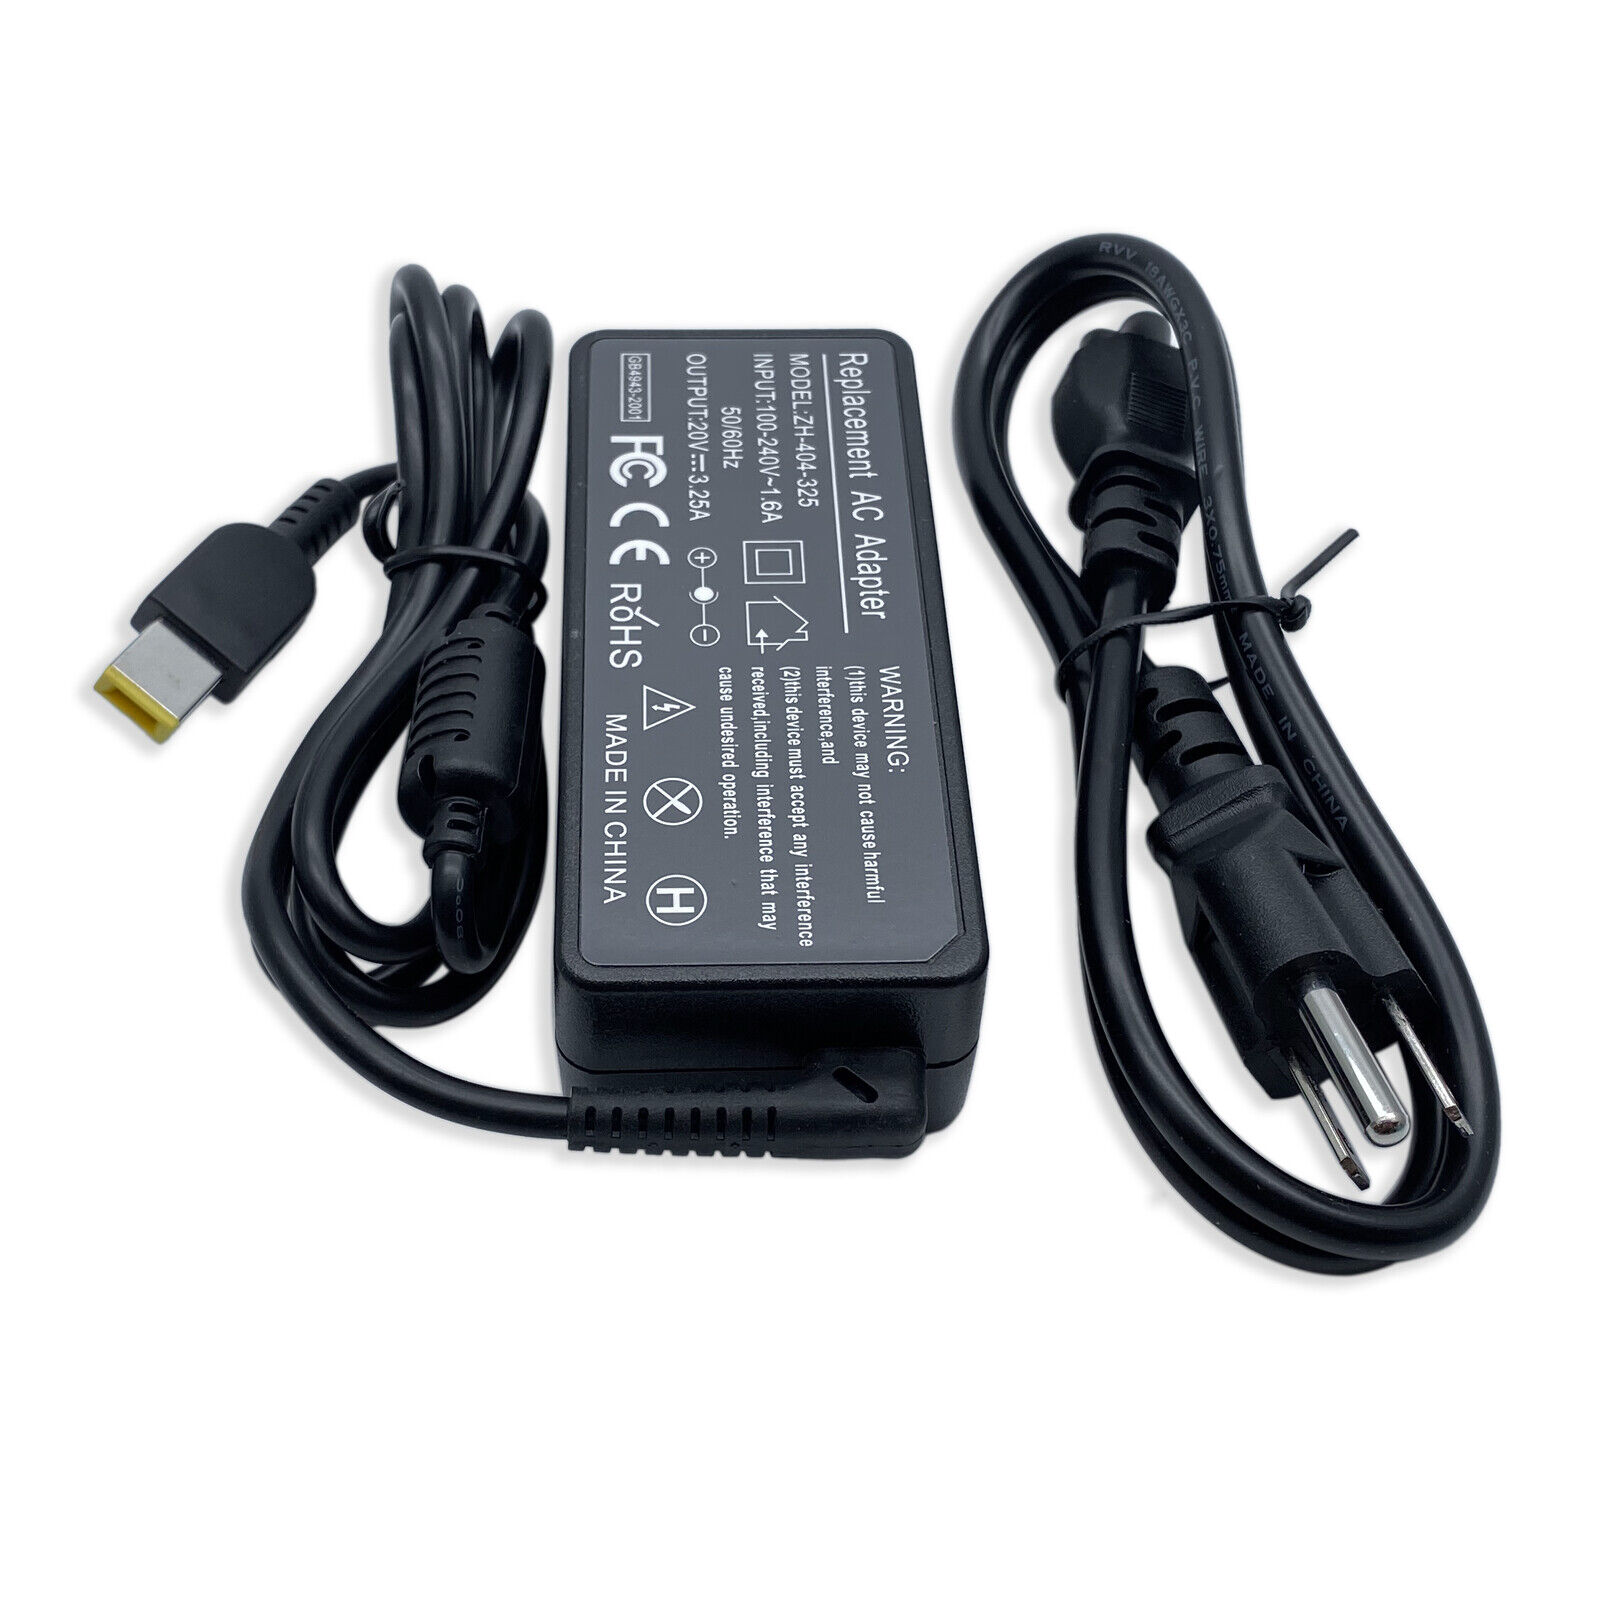 AC Adapter Charger Power Cord For Lenovo ThinkPad X1 Carbon 1st Gen Laptop  707943761912 | eBay